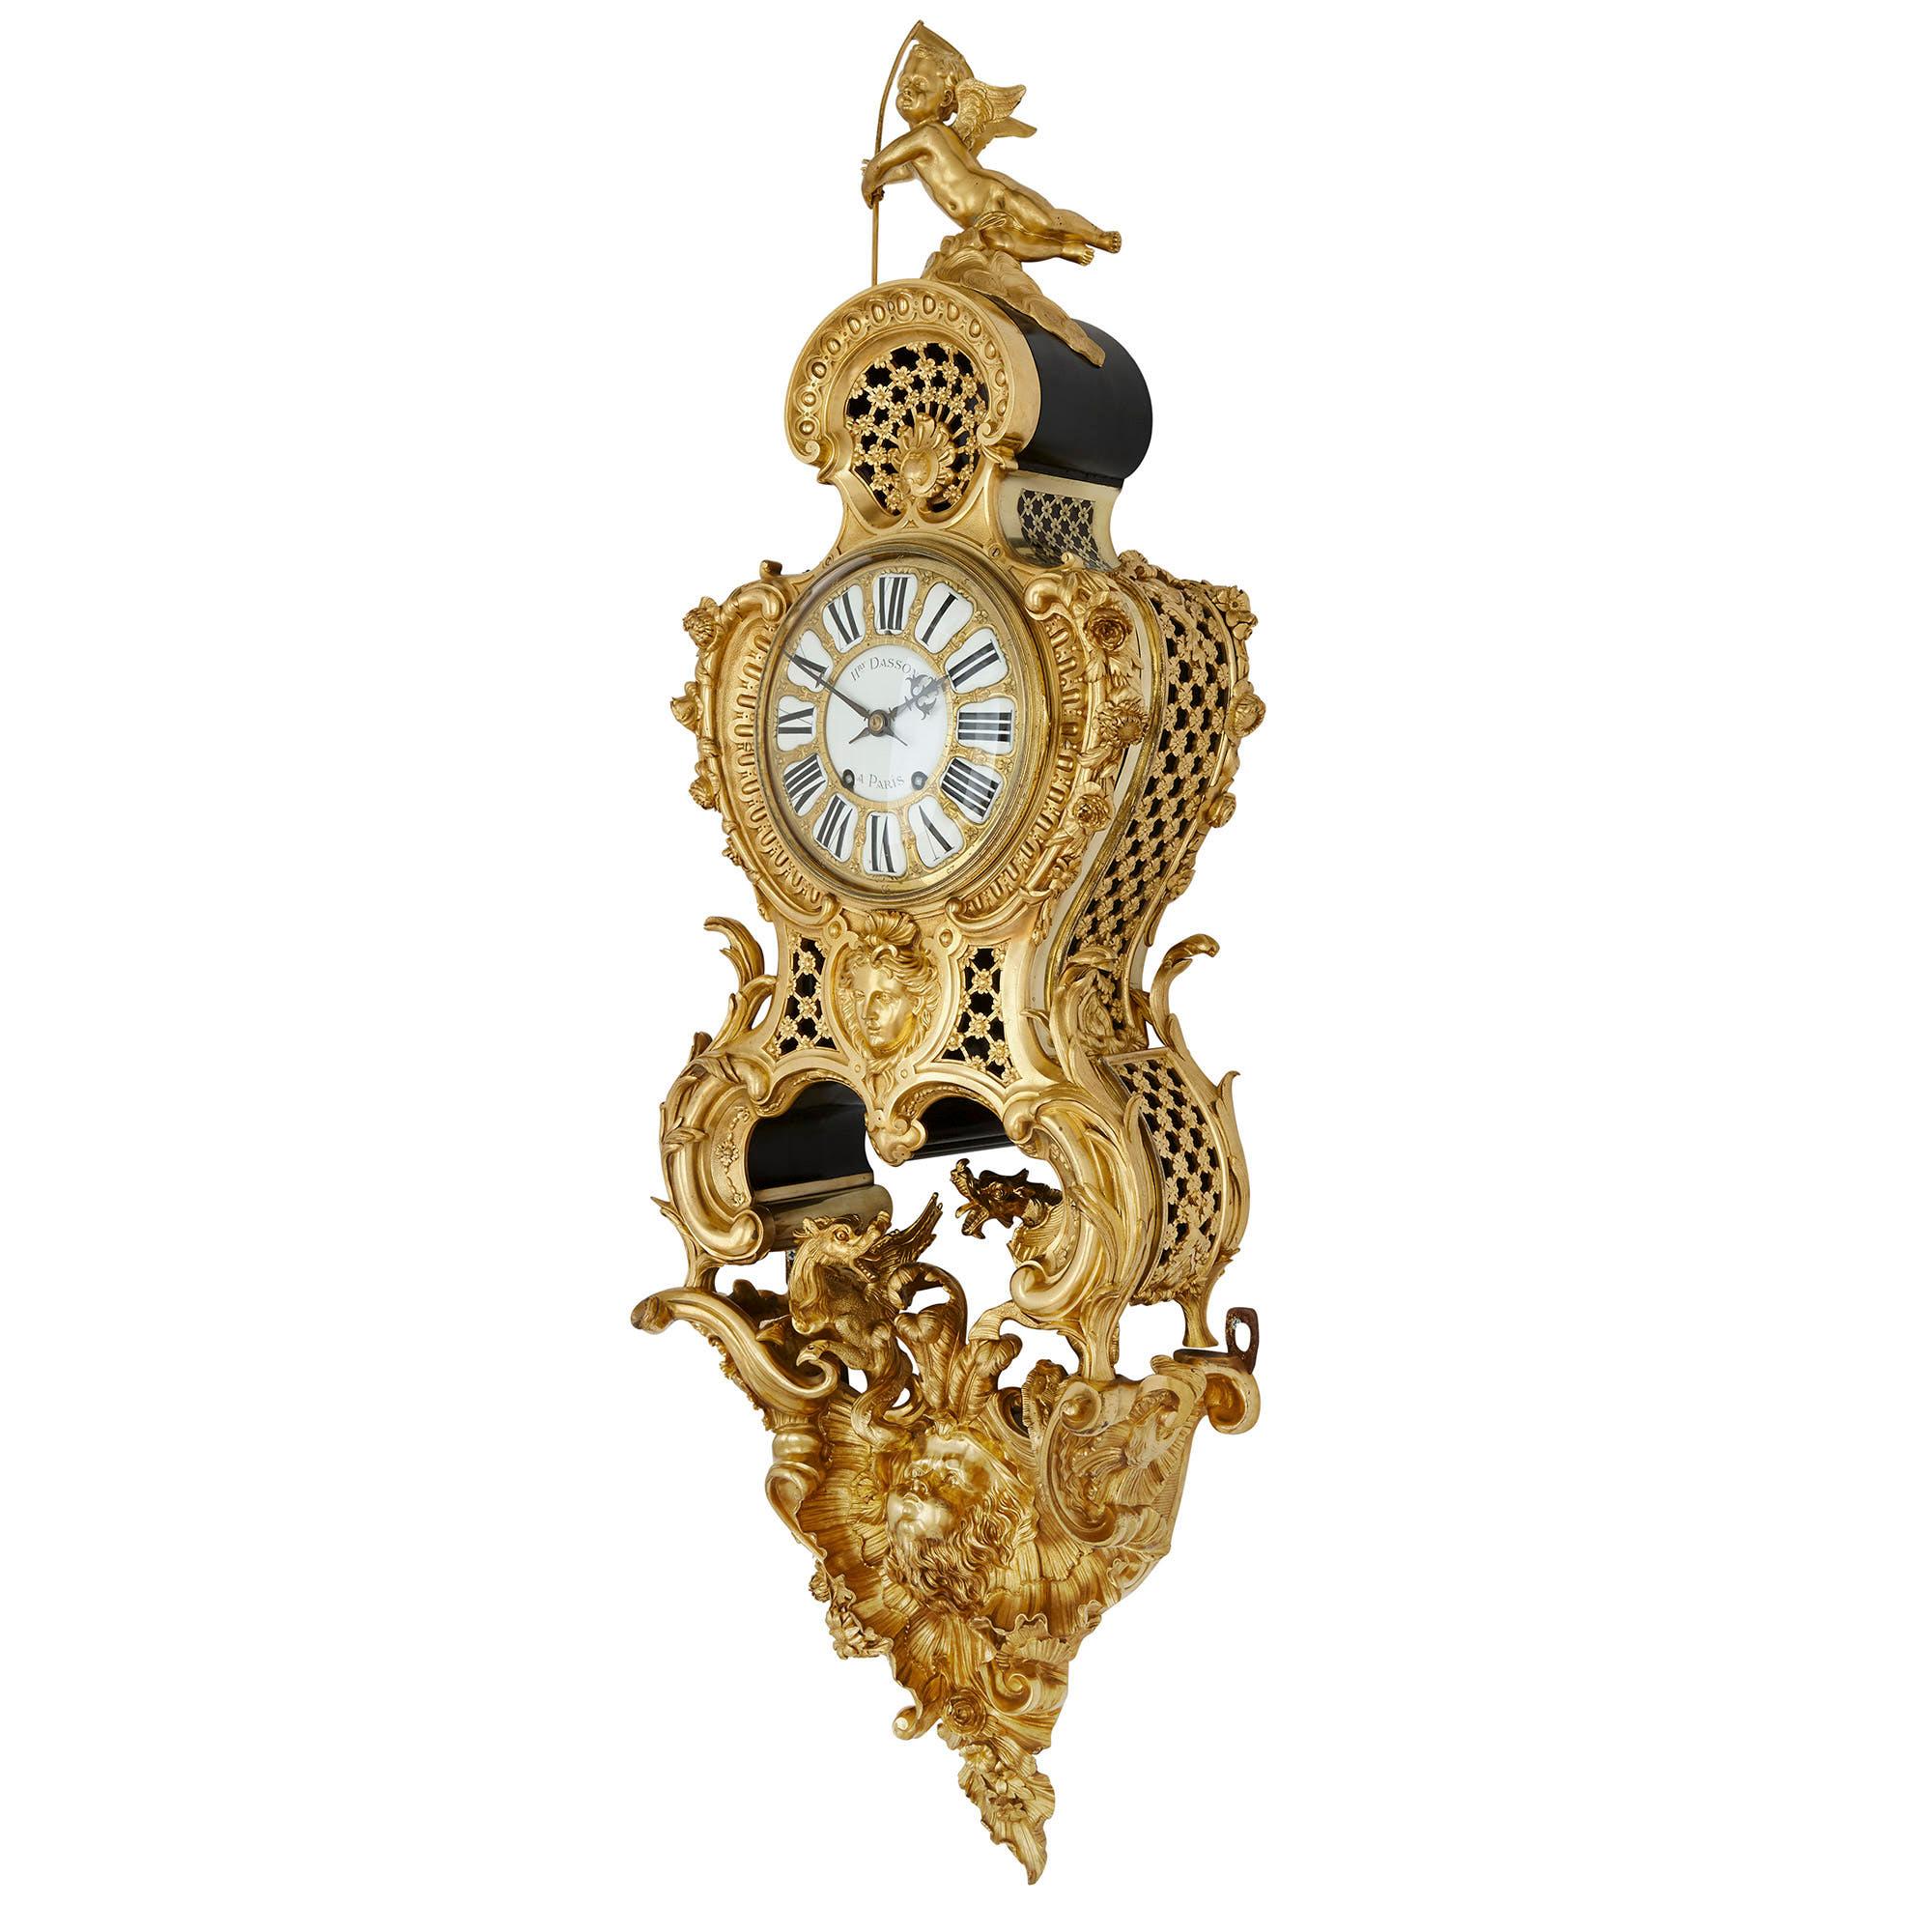 Antique French Belle Époque Rococo style bracket clock by Henry Dasson
French, 1882
Measures: Total height 136cm
Clock height 86cm, width 37cm, depth 18cm
Bracket height 50cm, width 38cm, depth 18cm

Beautifully crafted from ormolu, this